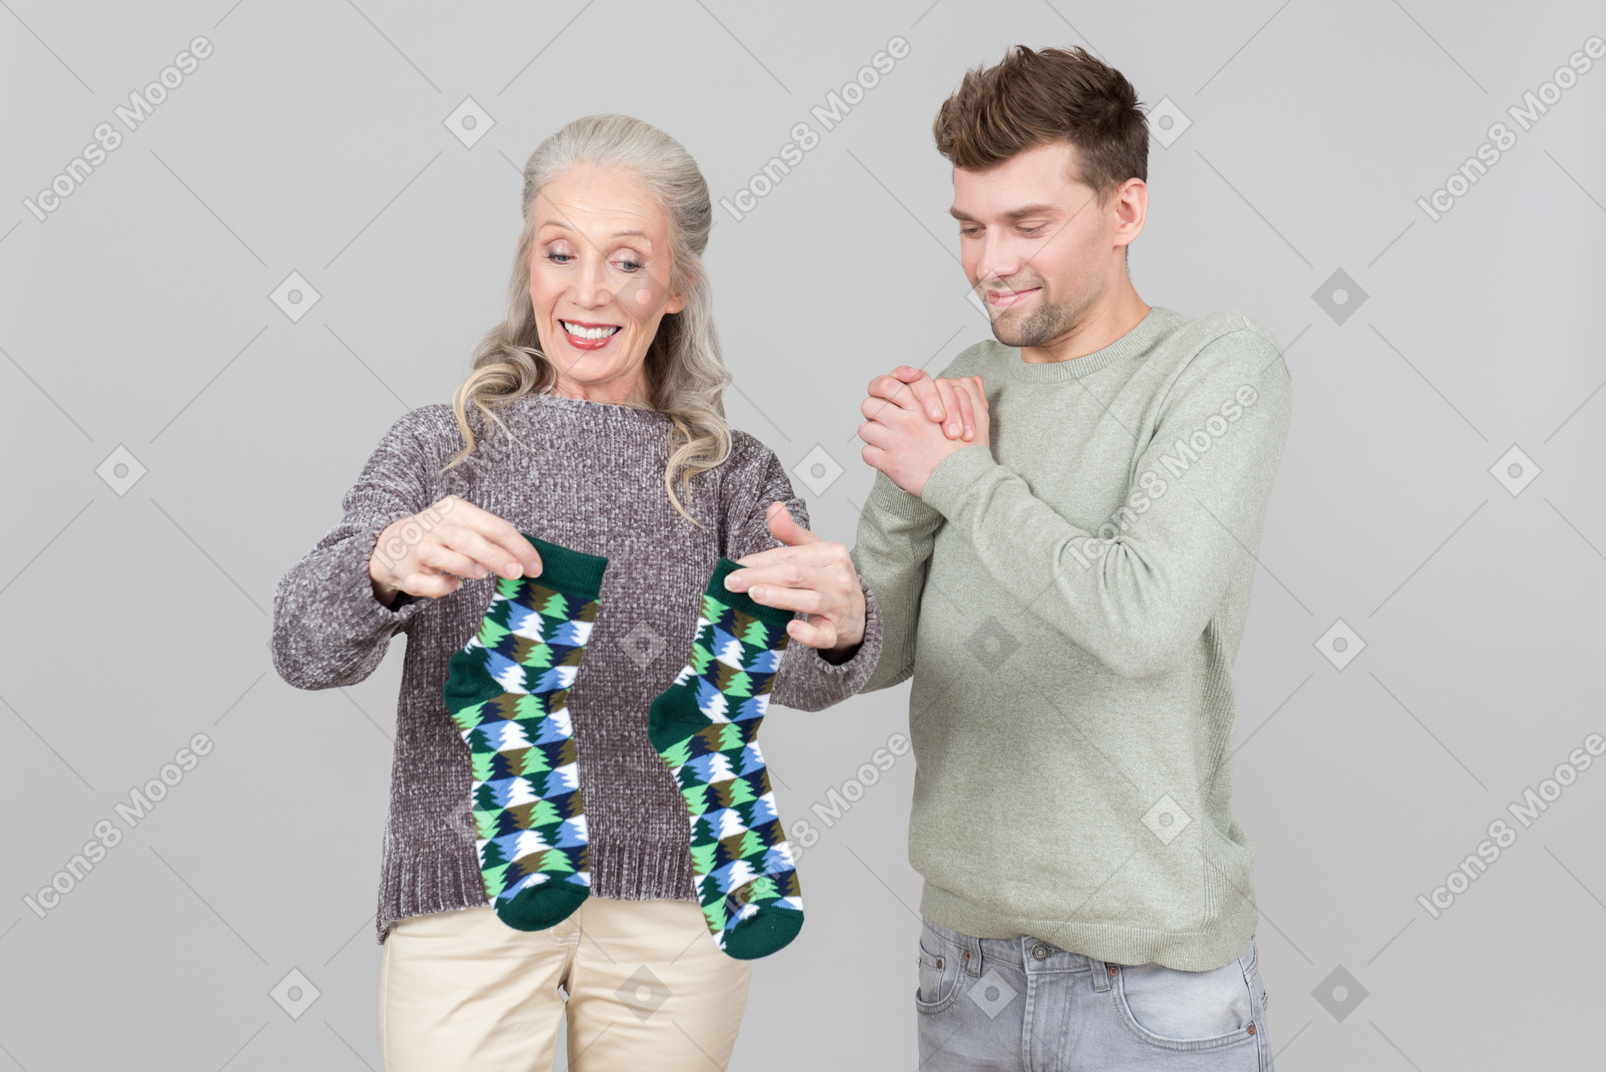 Elegant old woman giving socks as a present to a young guy